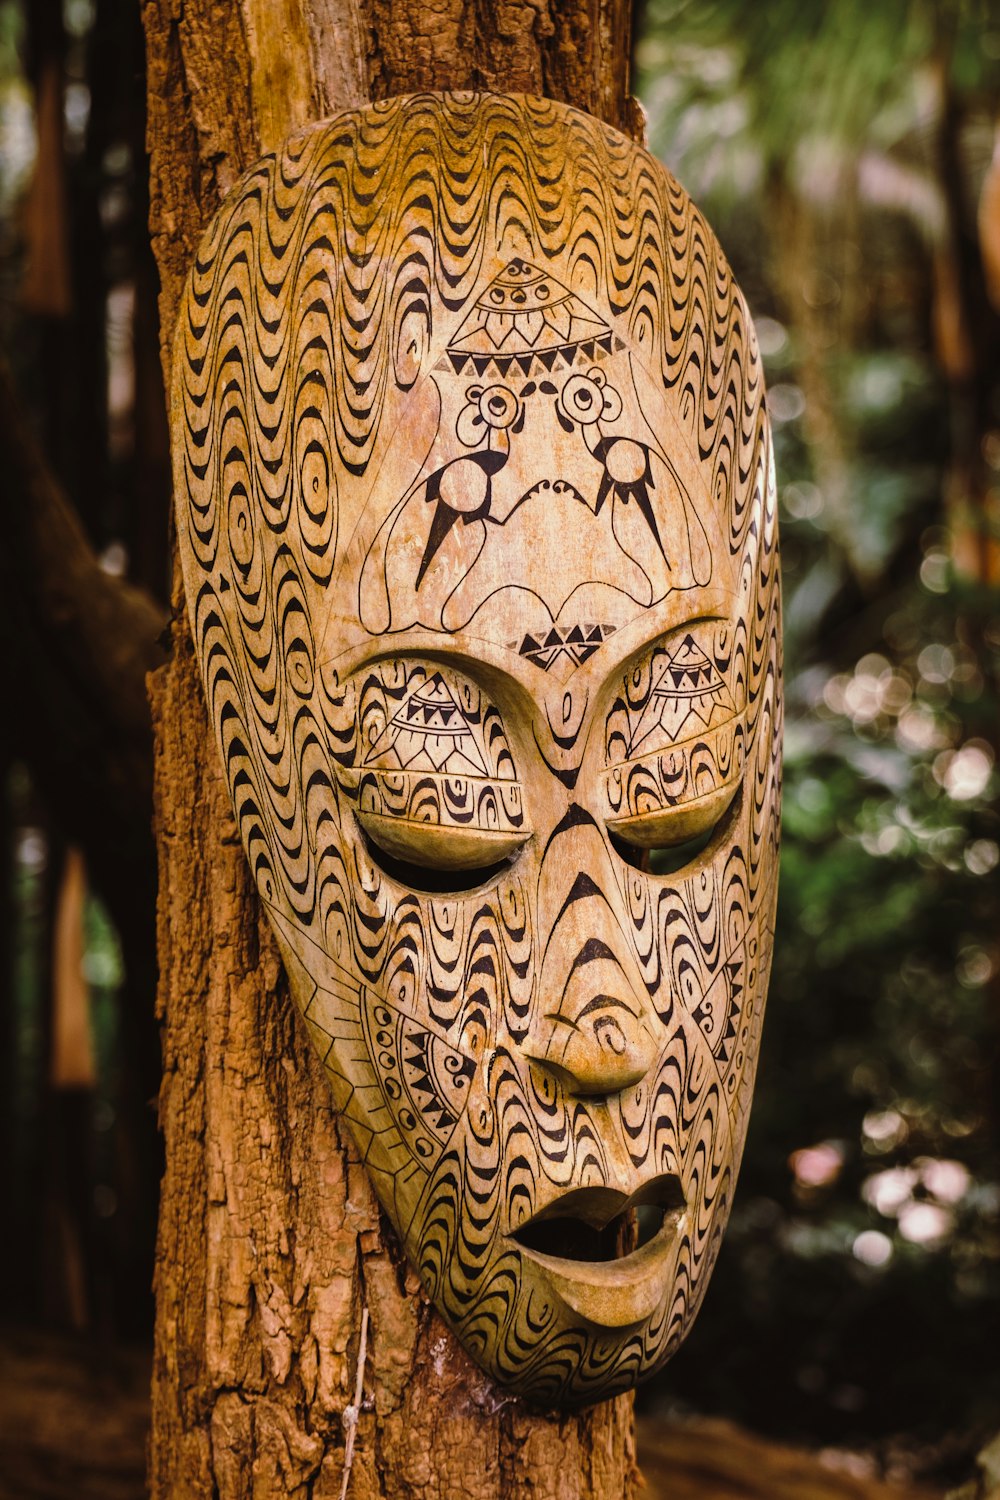 a wooden mask hanging on a tree in a forest